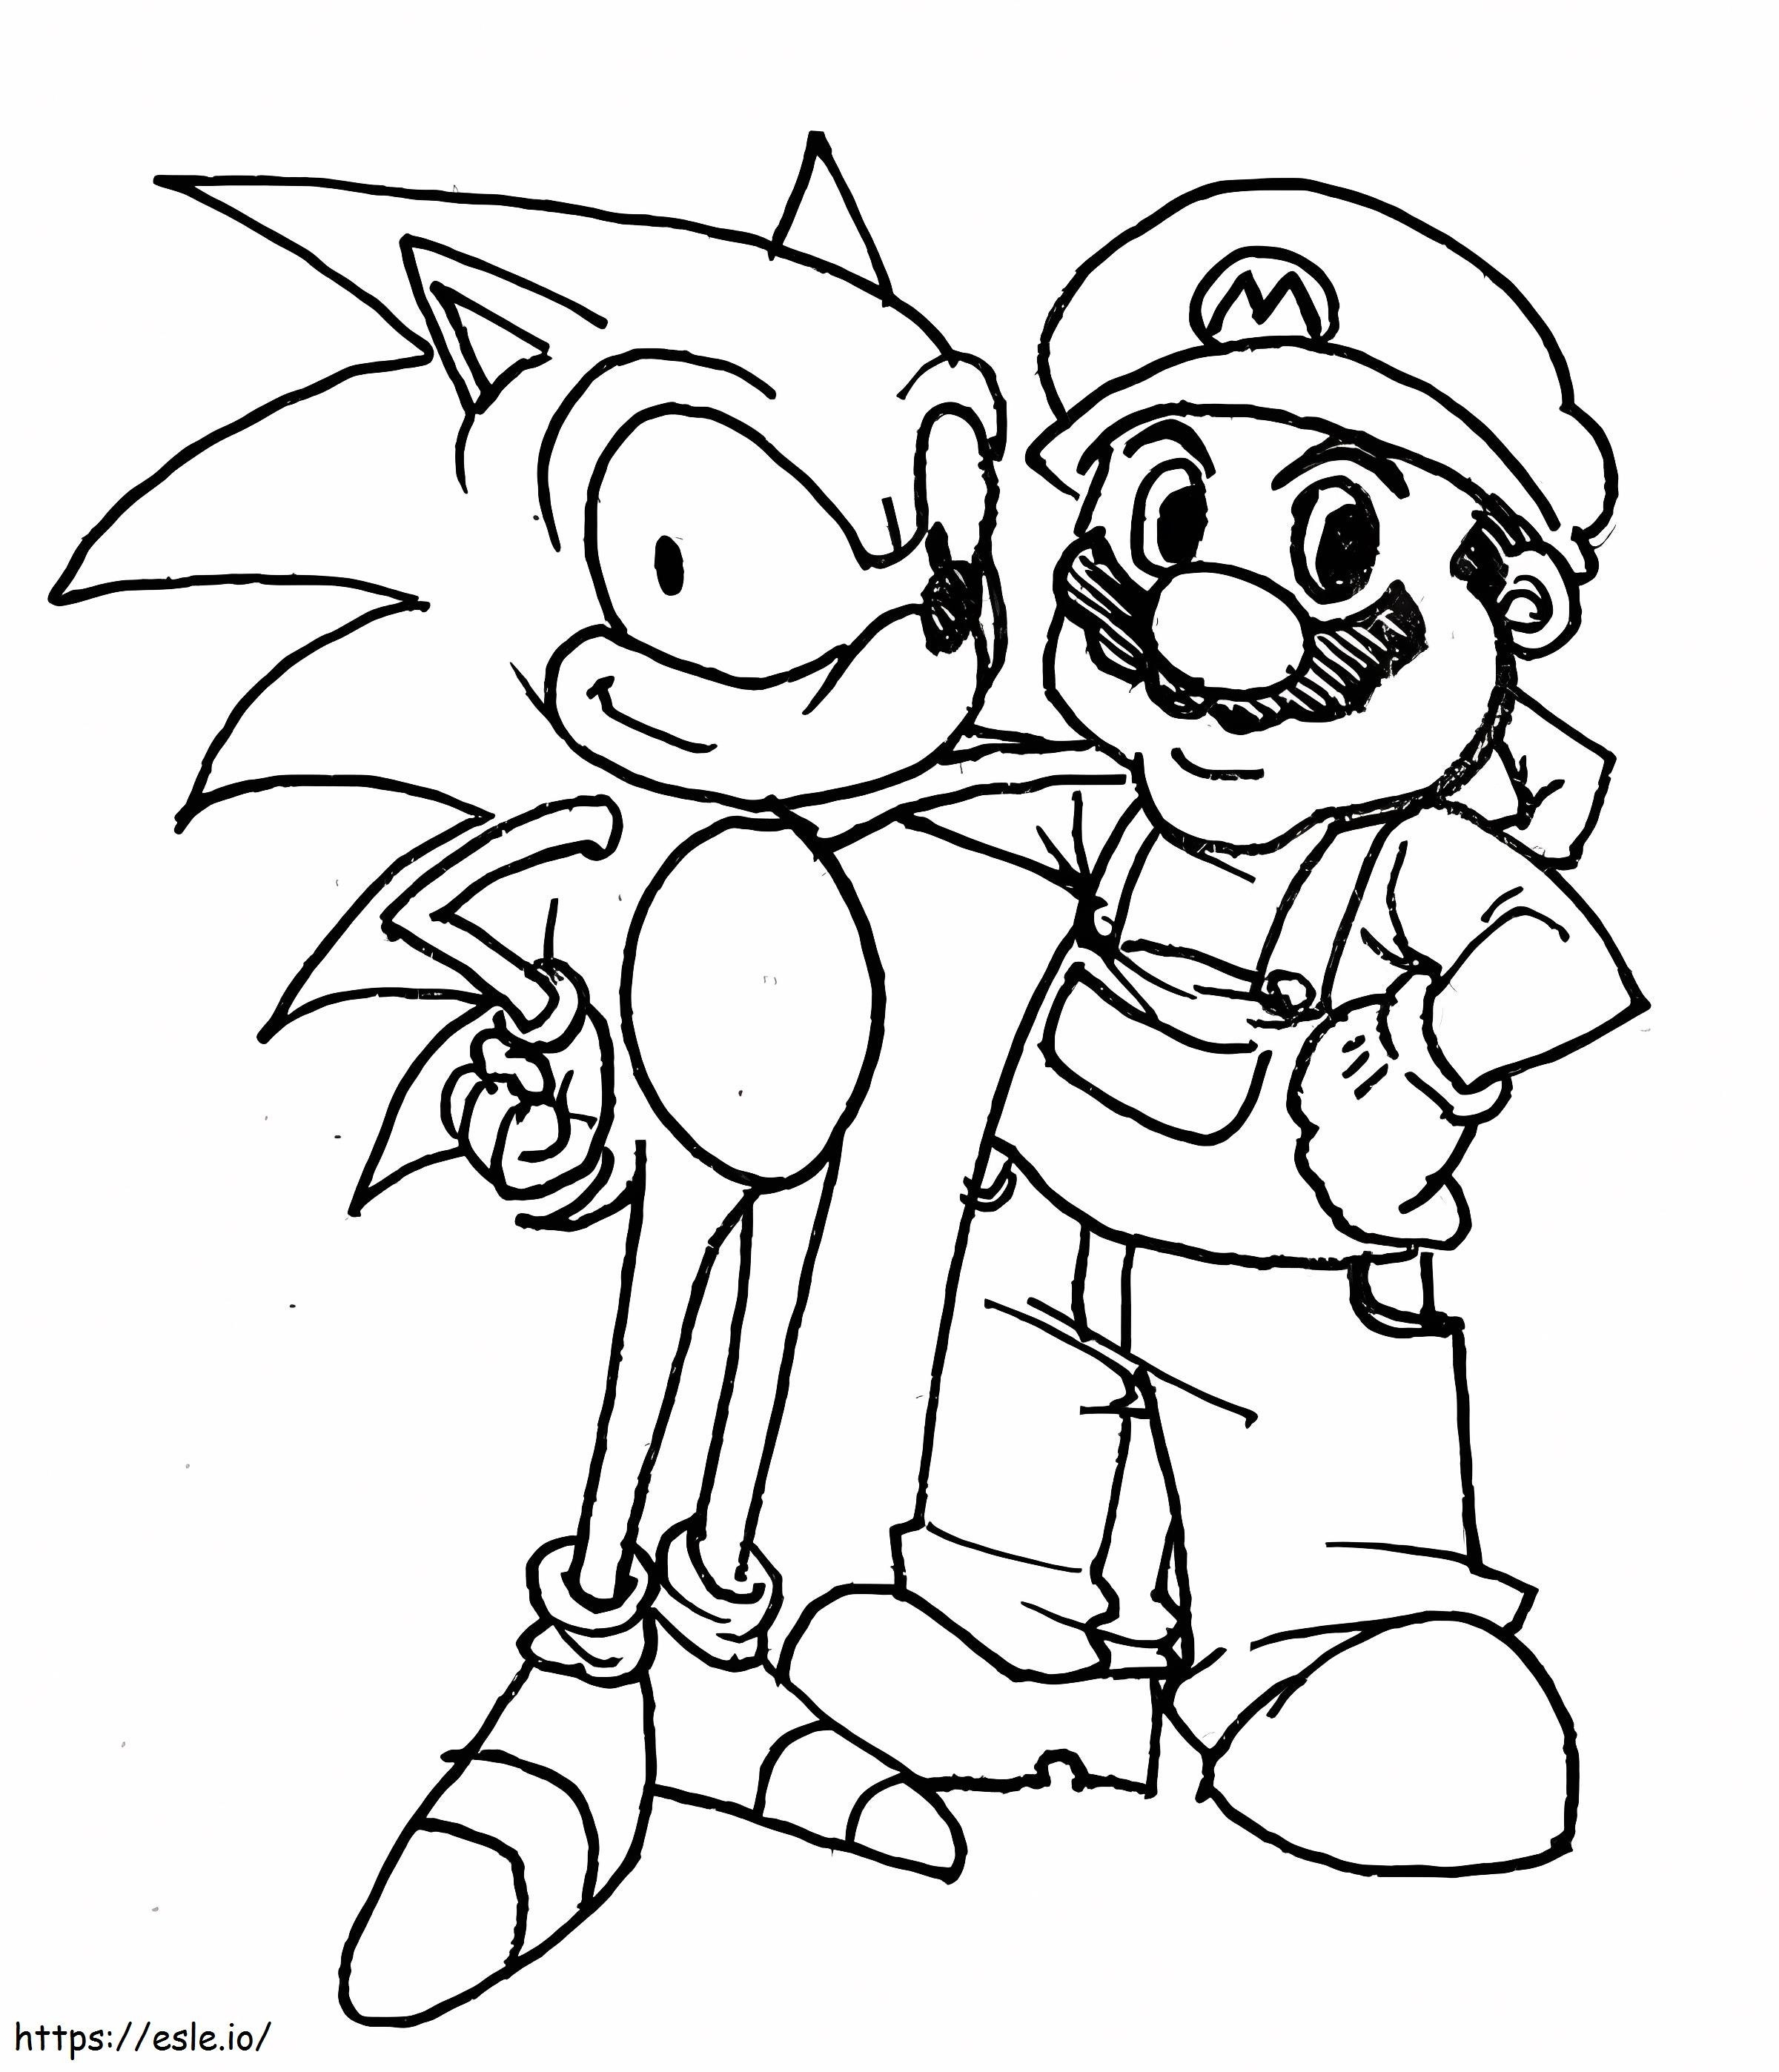 Mario With Sonic coloring page